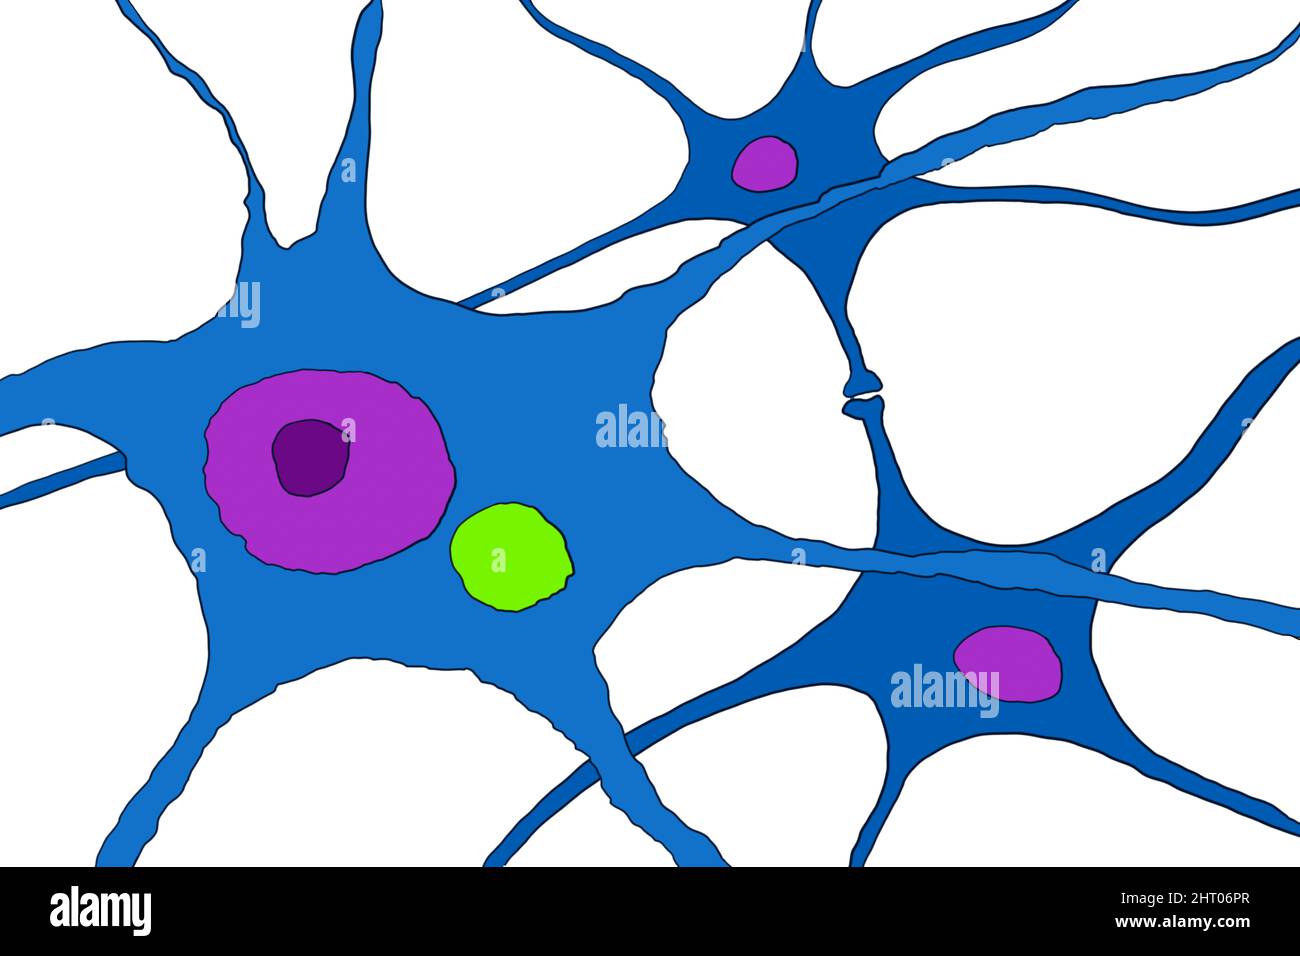 Rabies virus particles in neuron, illustration Stock Photo